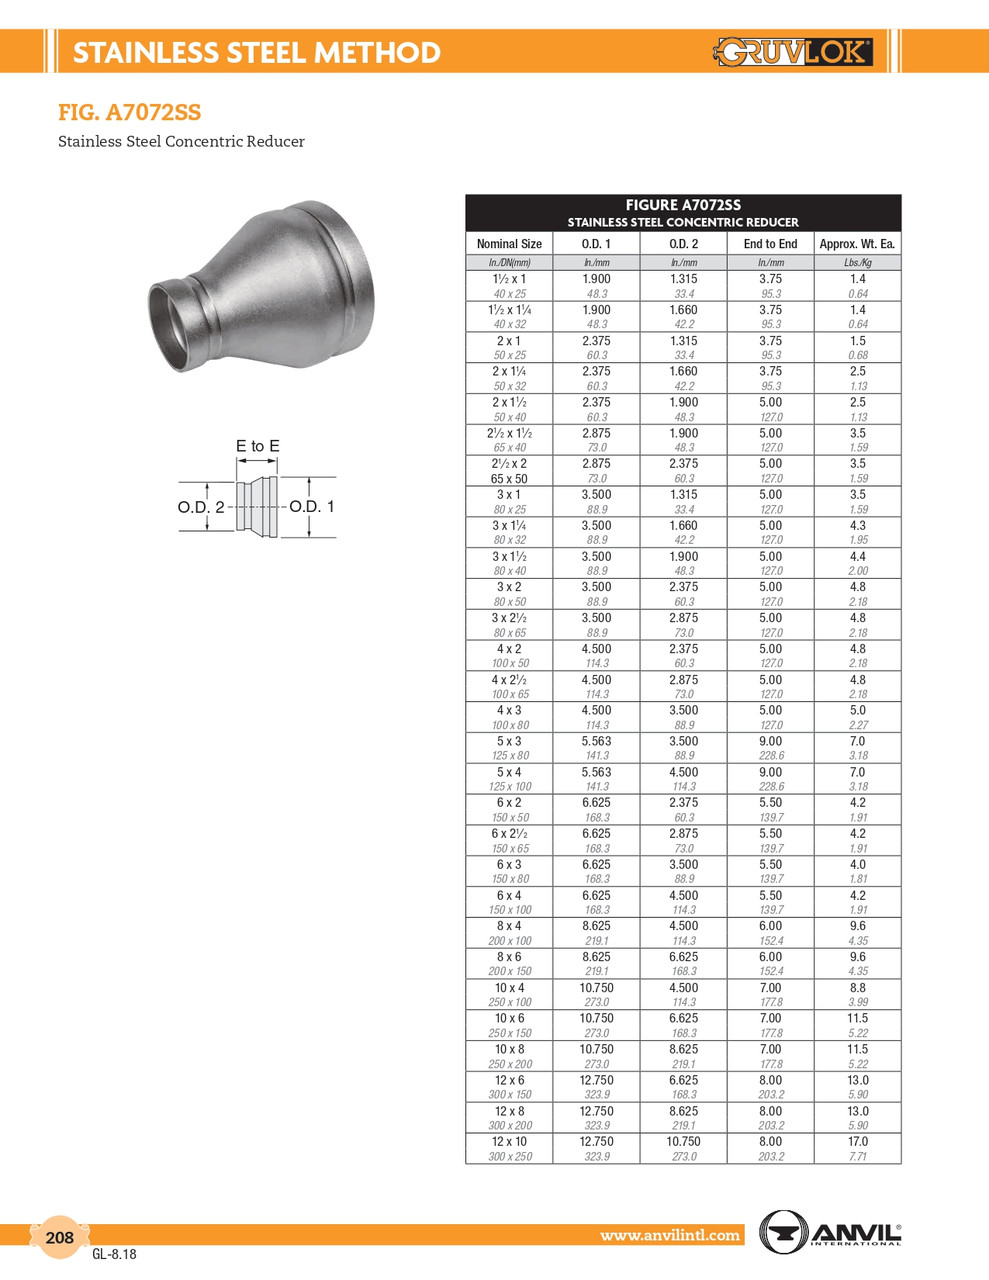 Fig. A7072SS Stainless Concentric Reducer 8 x 6"